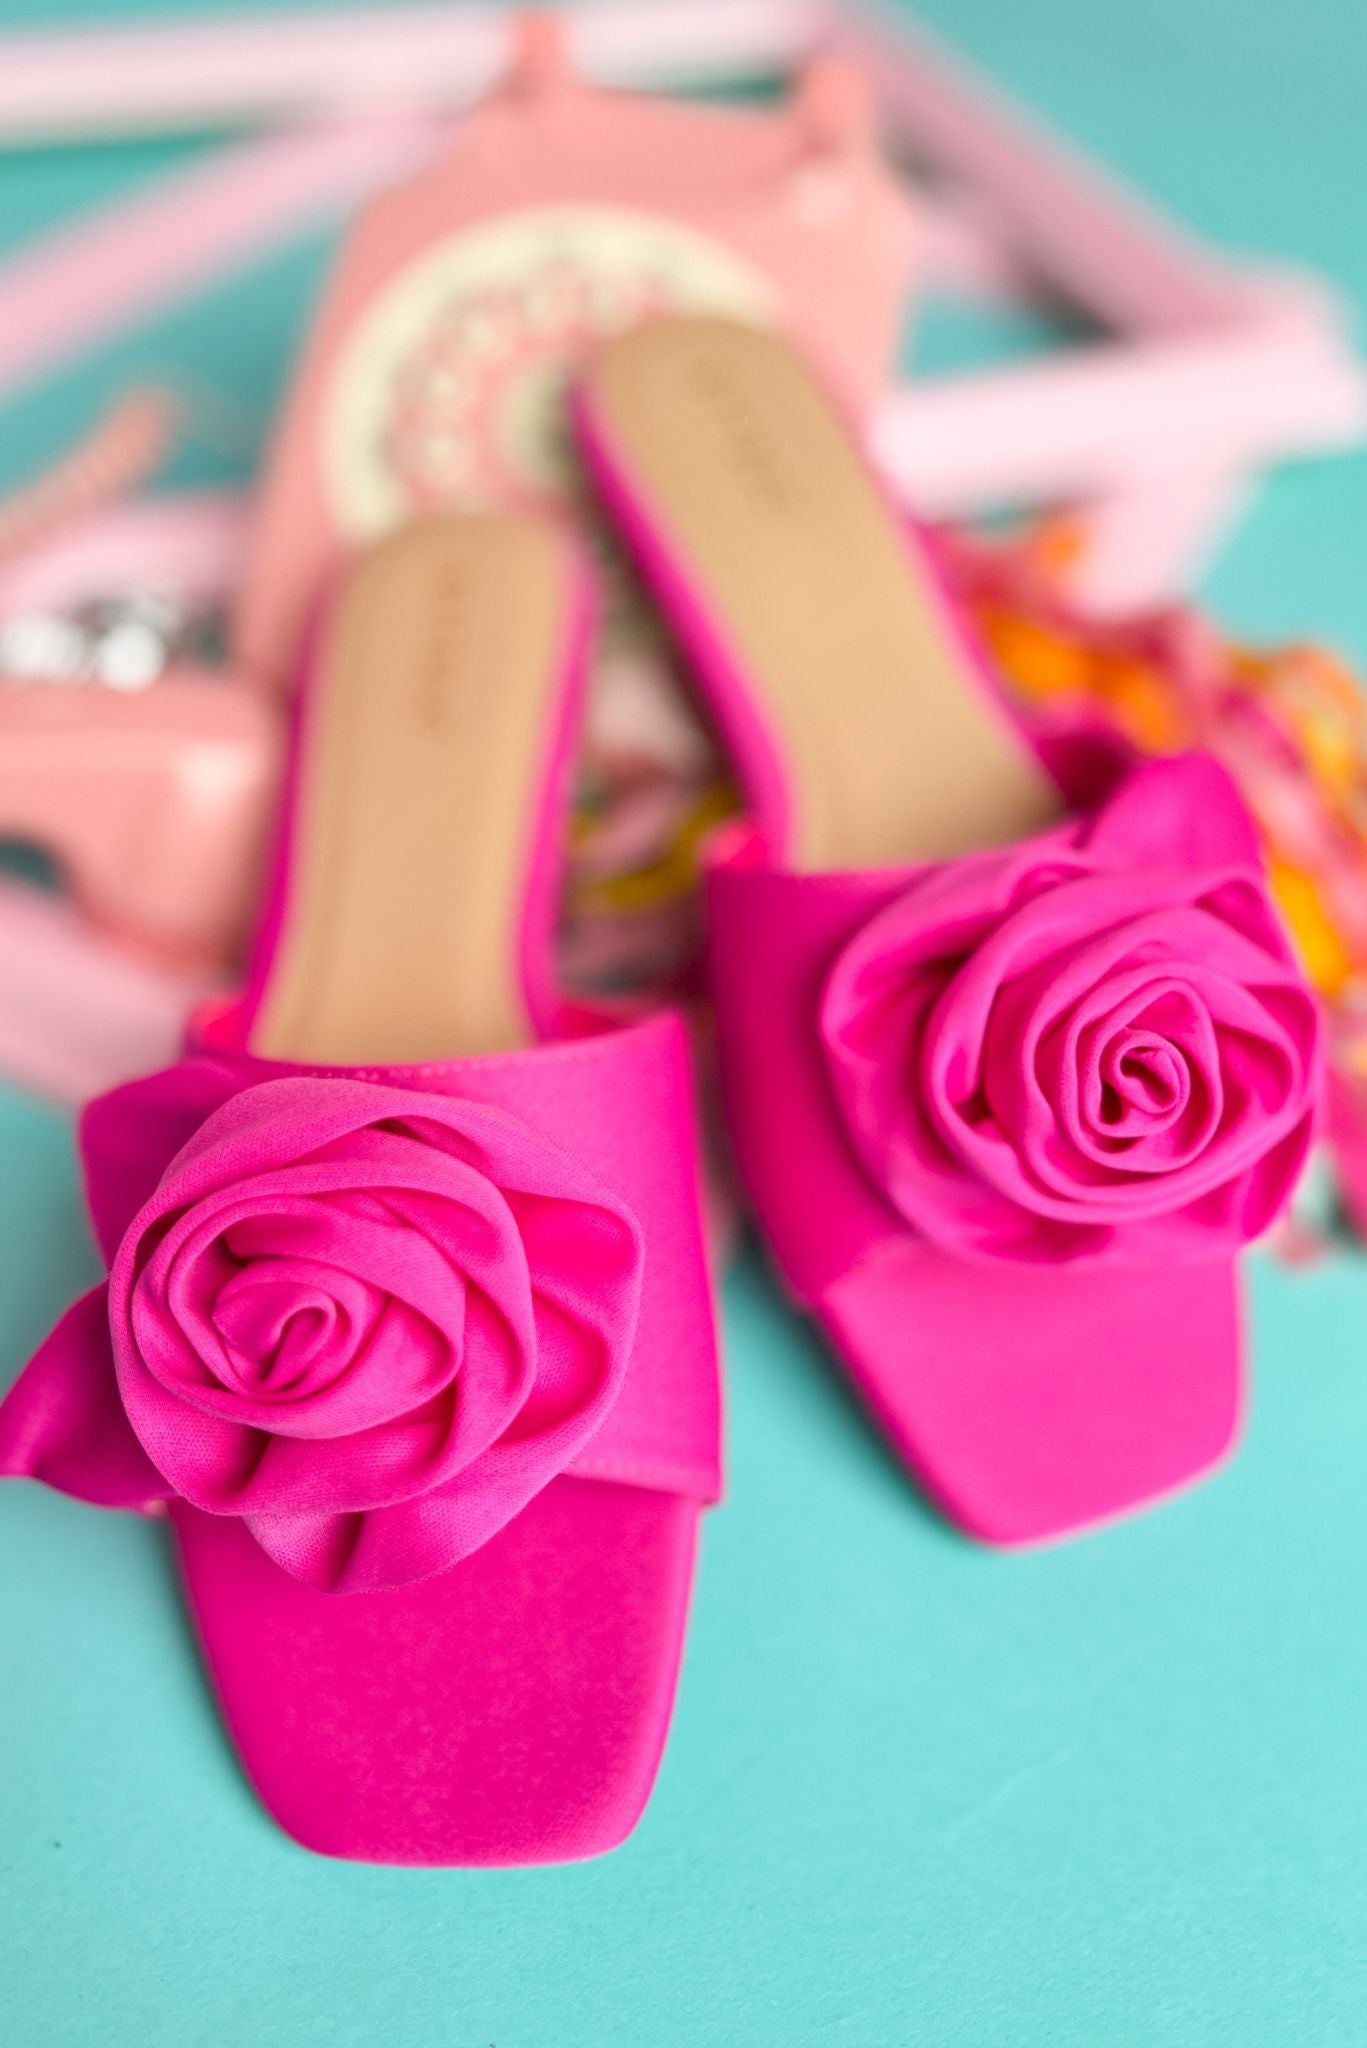 Load image into Gallery viewer, Hot Pink Flower Detail Slide Sandals, summer sandal, slide sandal, new arrival, must have, shop style your senses by mallory fitzsimmons
